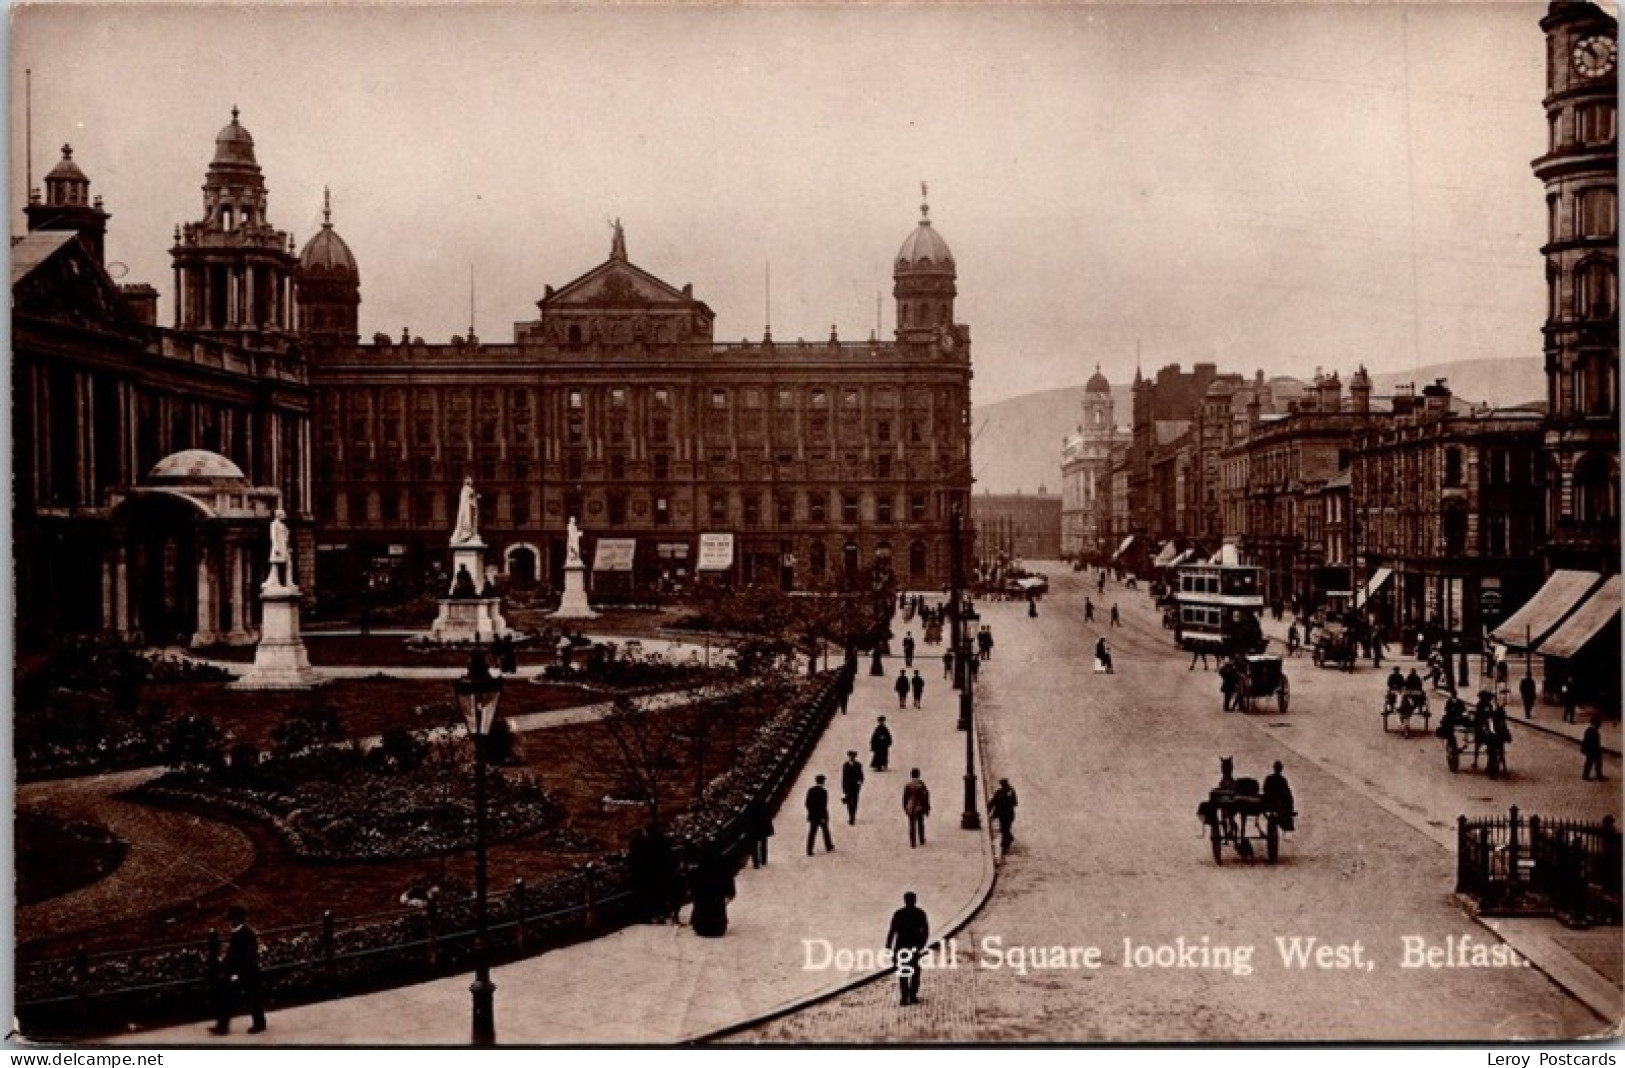 Donegall Square Looking West, Belfast, Northern Ireland - Antrim